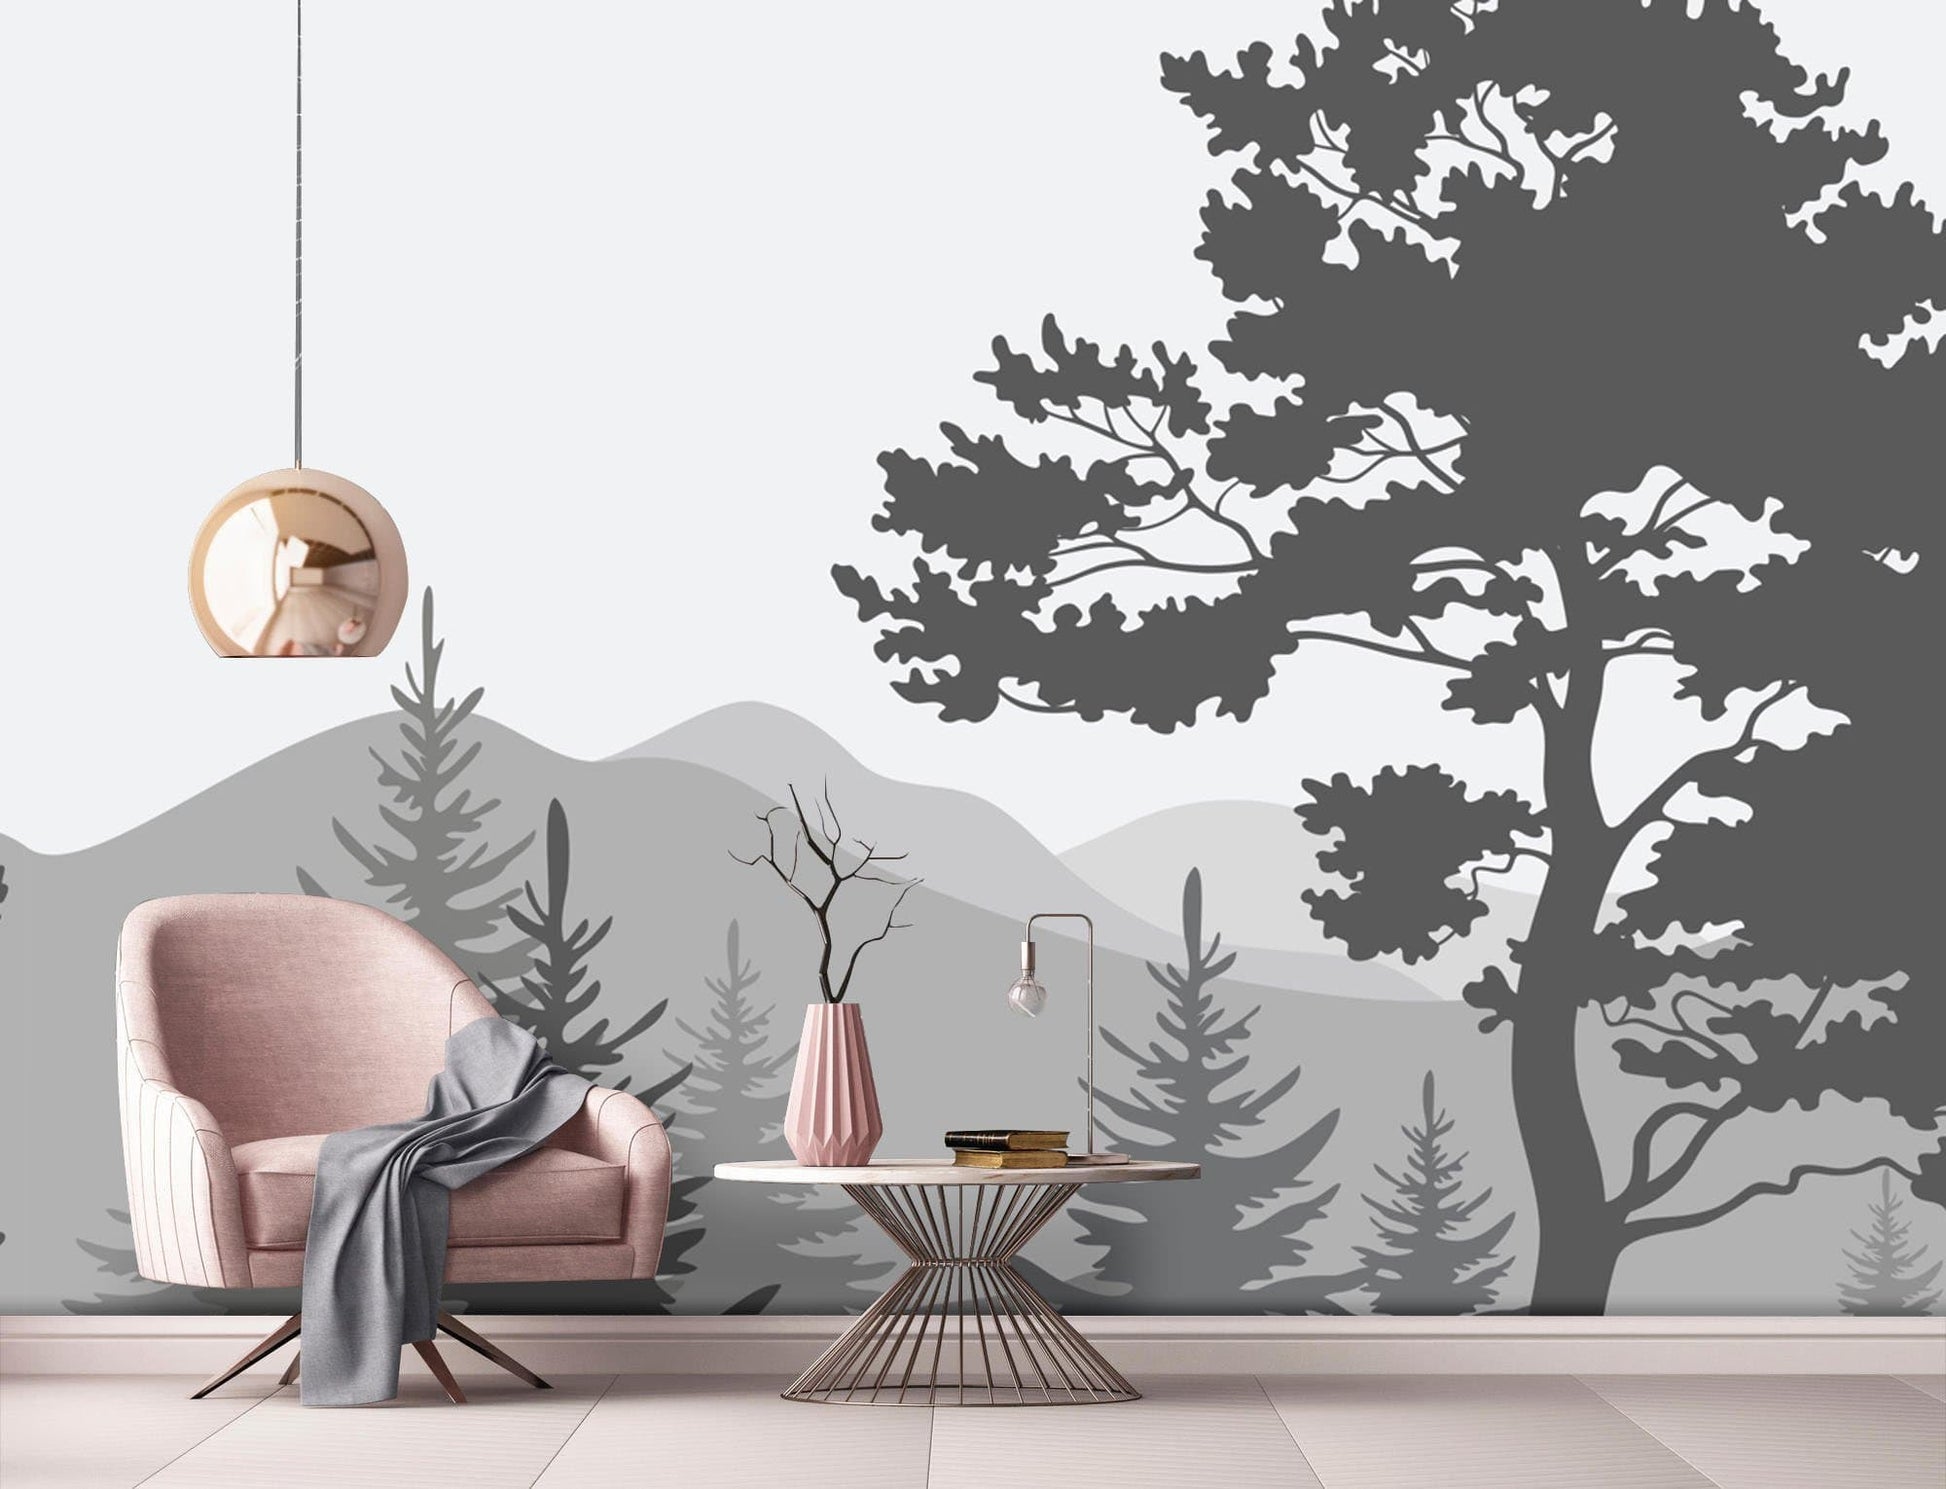 Decorate your living room with this hazy forest and mountain wallpaper mural.